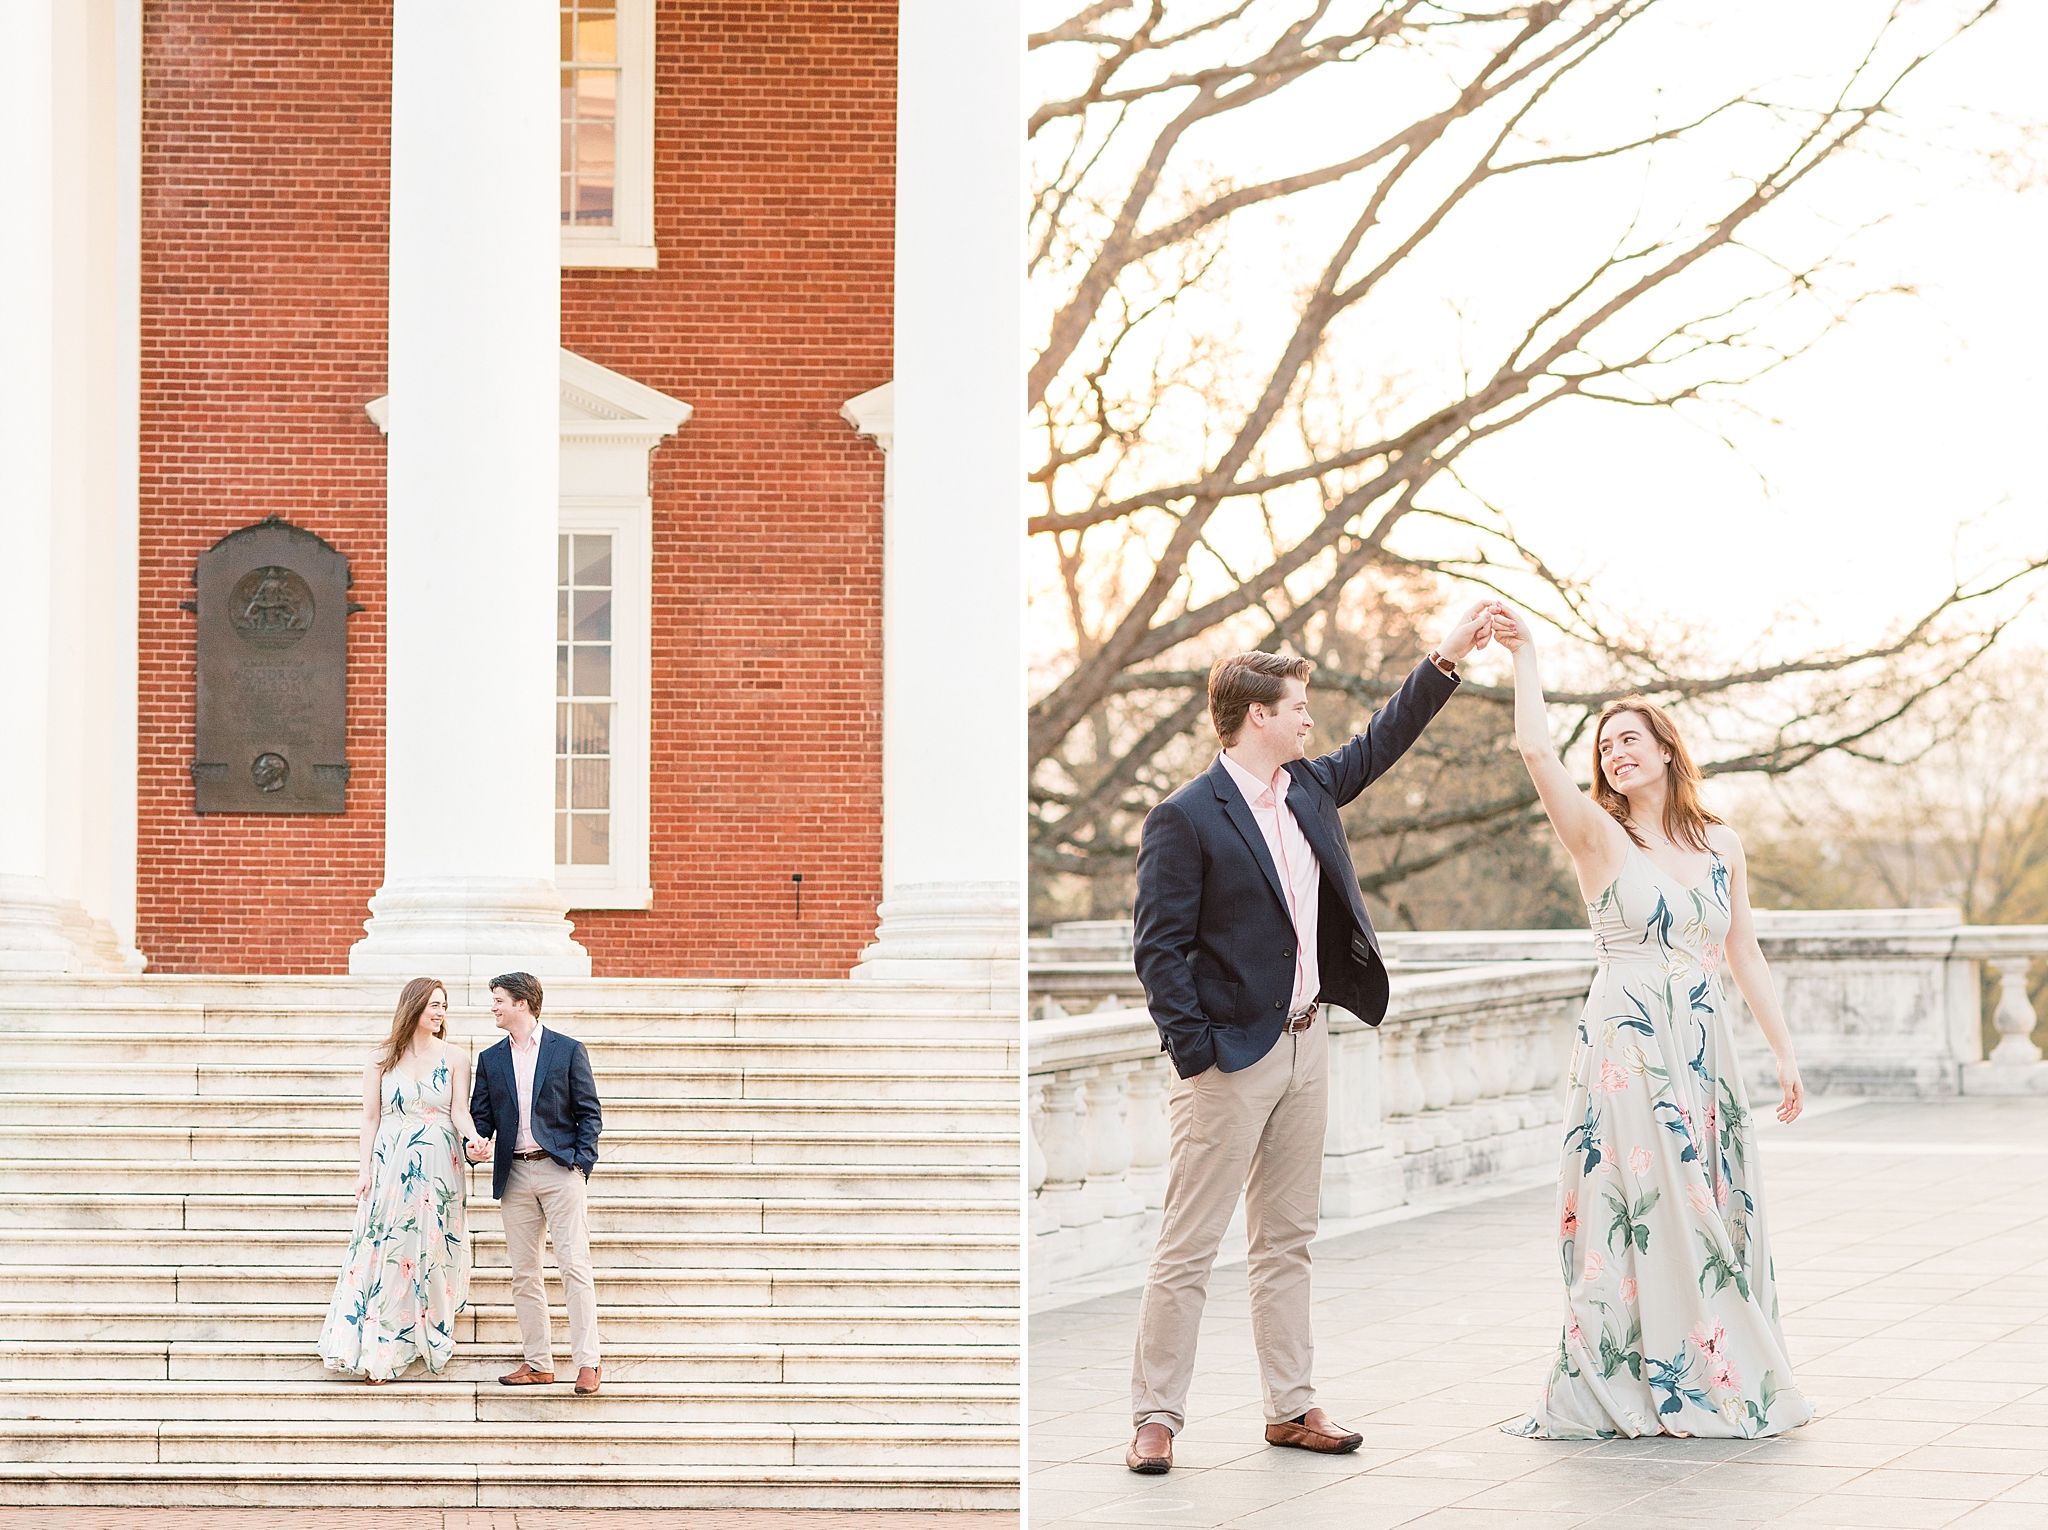 This fine art engagement session on the beautiful campus at the University of Virginia (UVA) includes the Rotunda, gardens, and other historic sites.